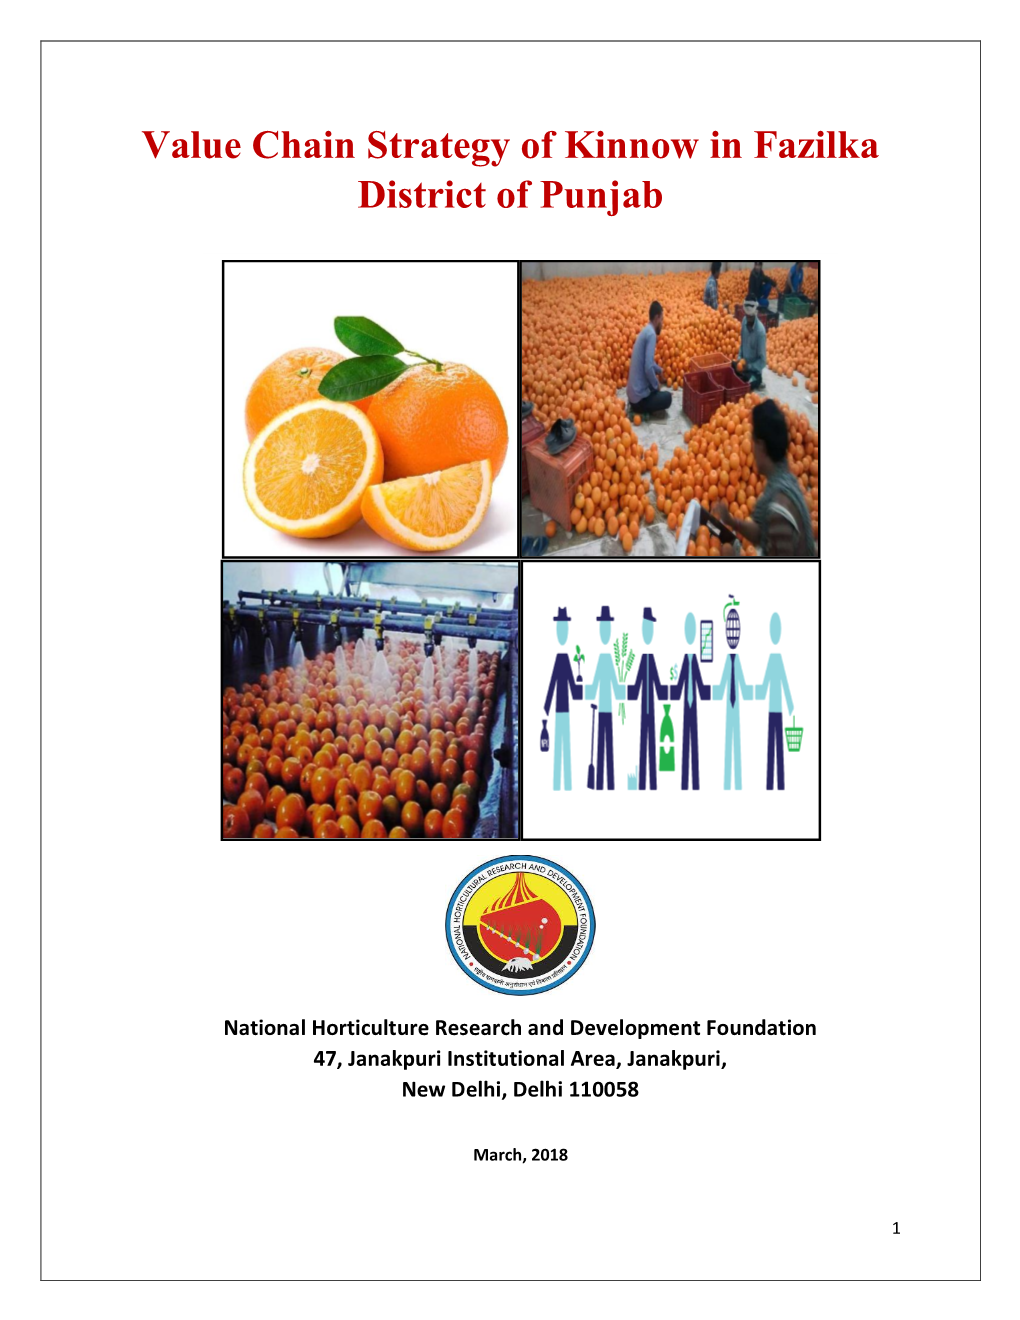 Value Chain Strategy of Kinnow in Fazilka District of Punjab